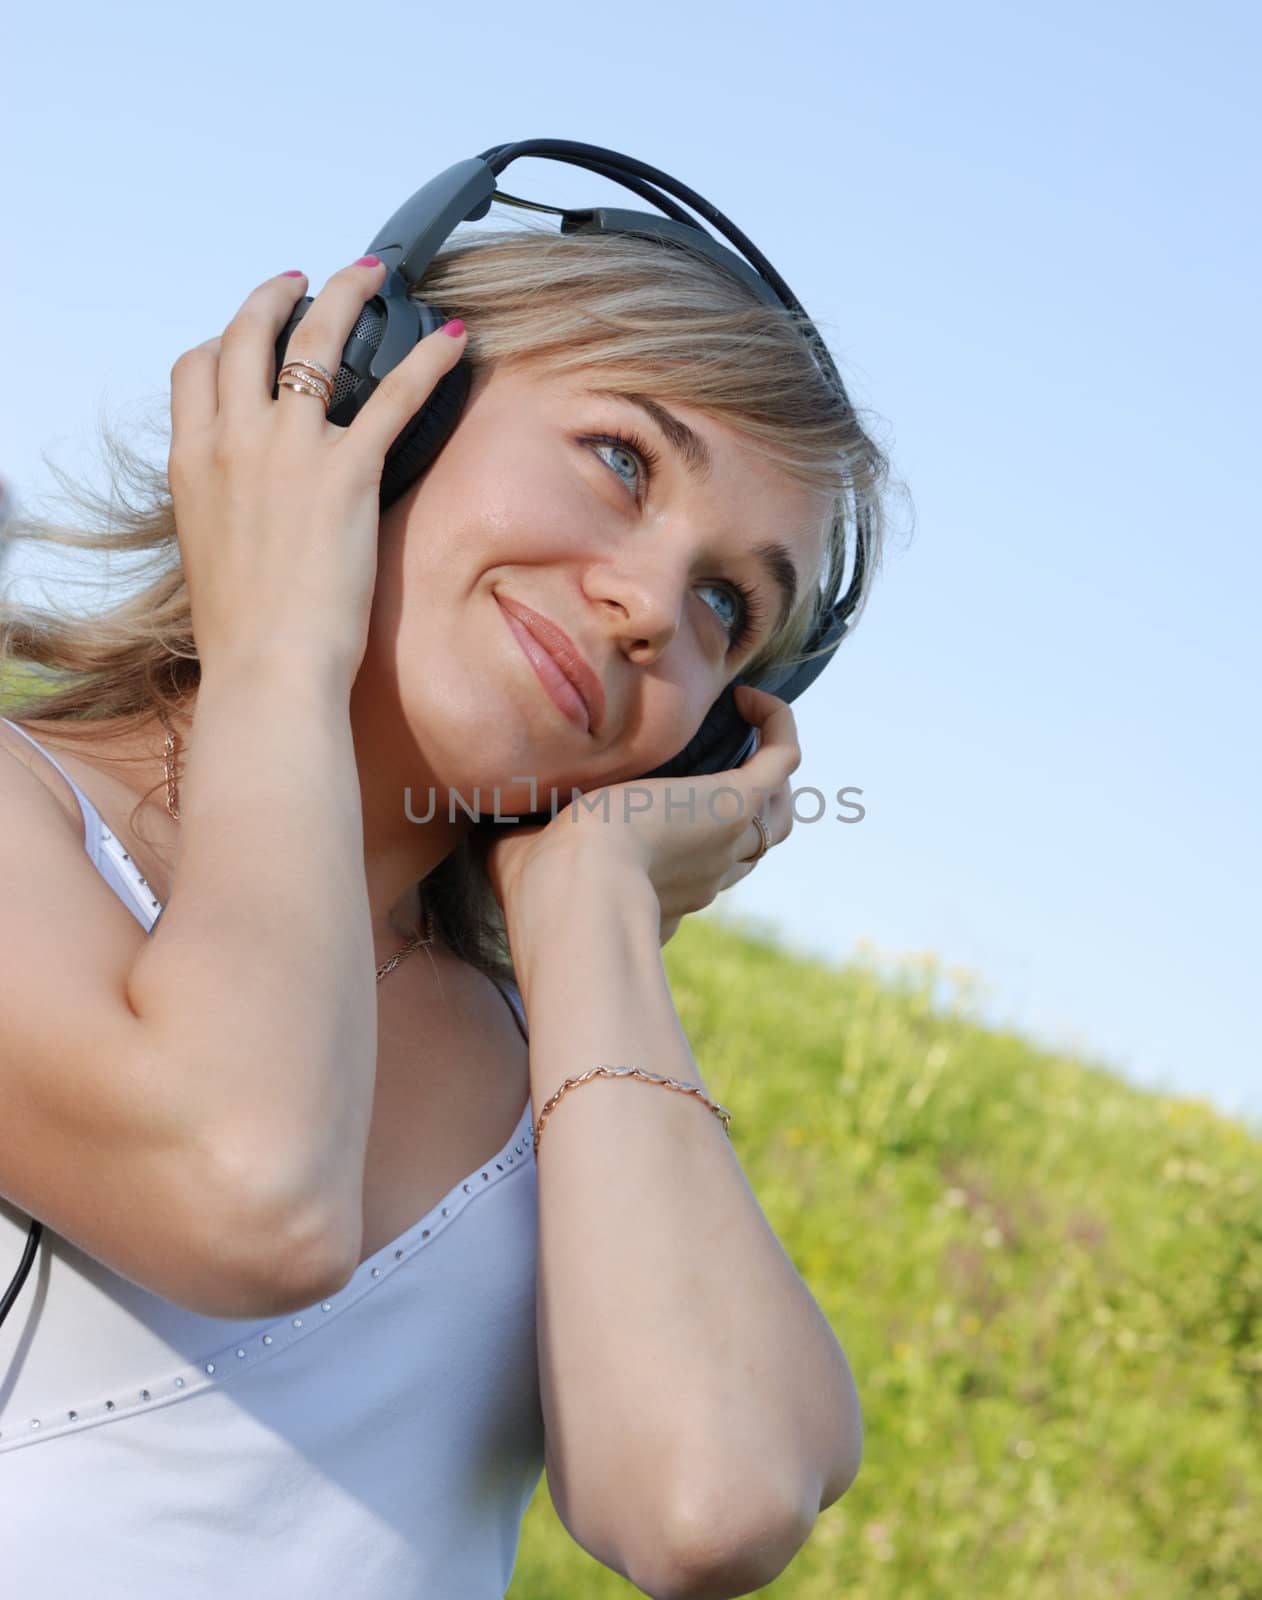 The girl in headphones. The young woman listening music through headphones